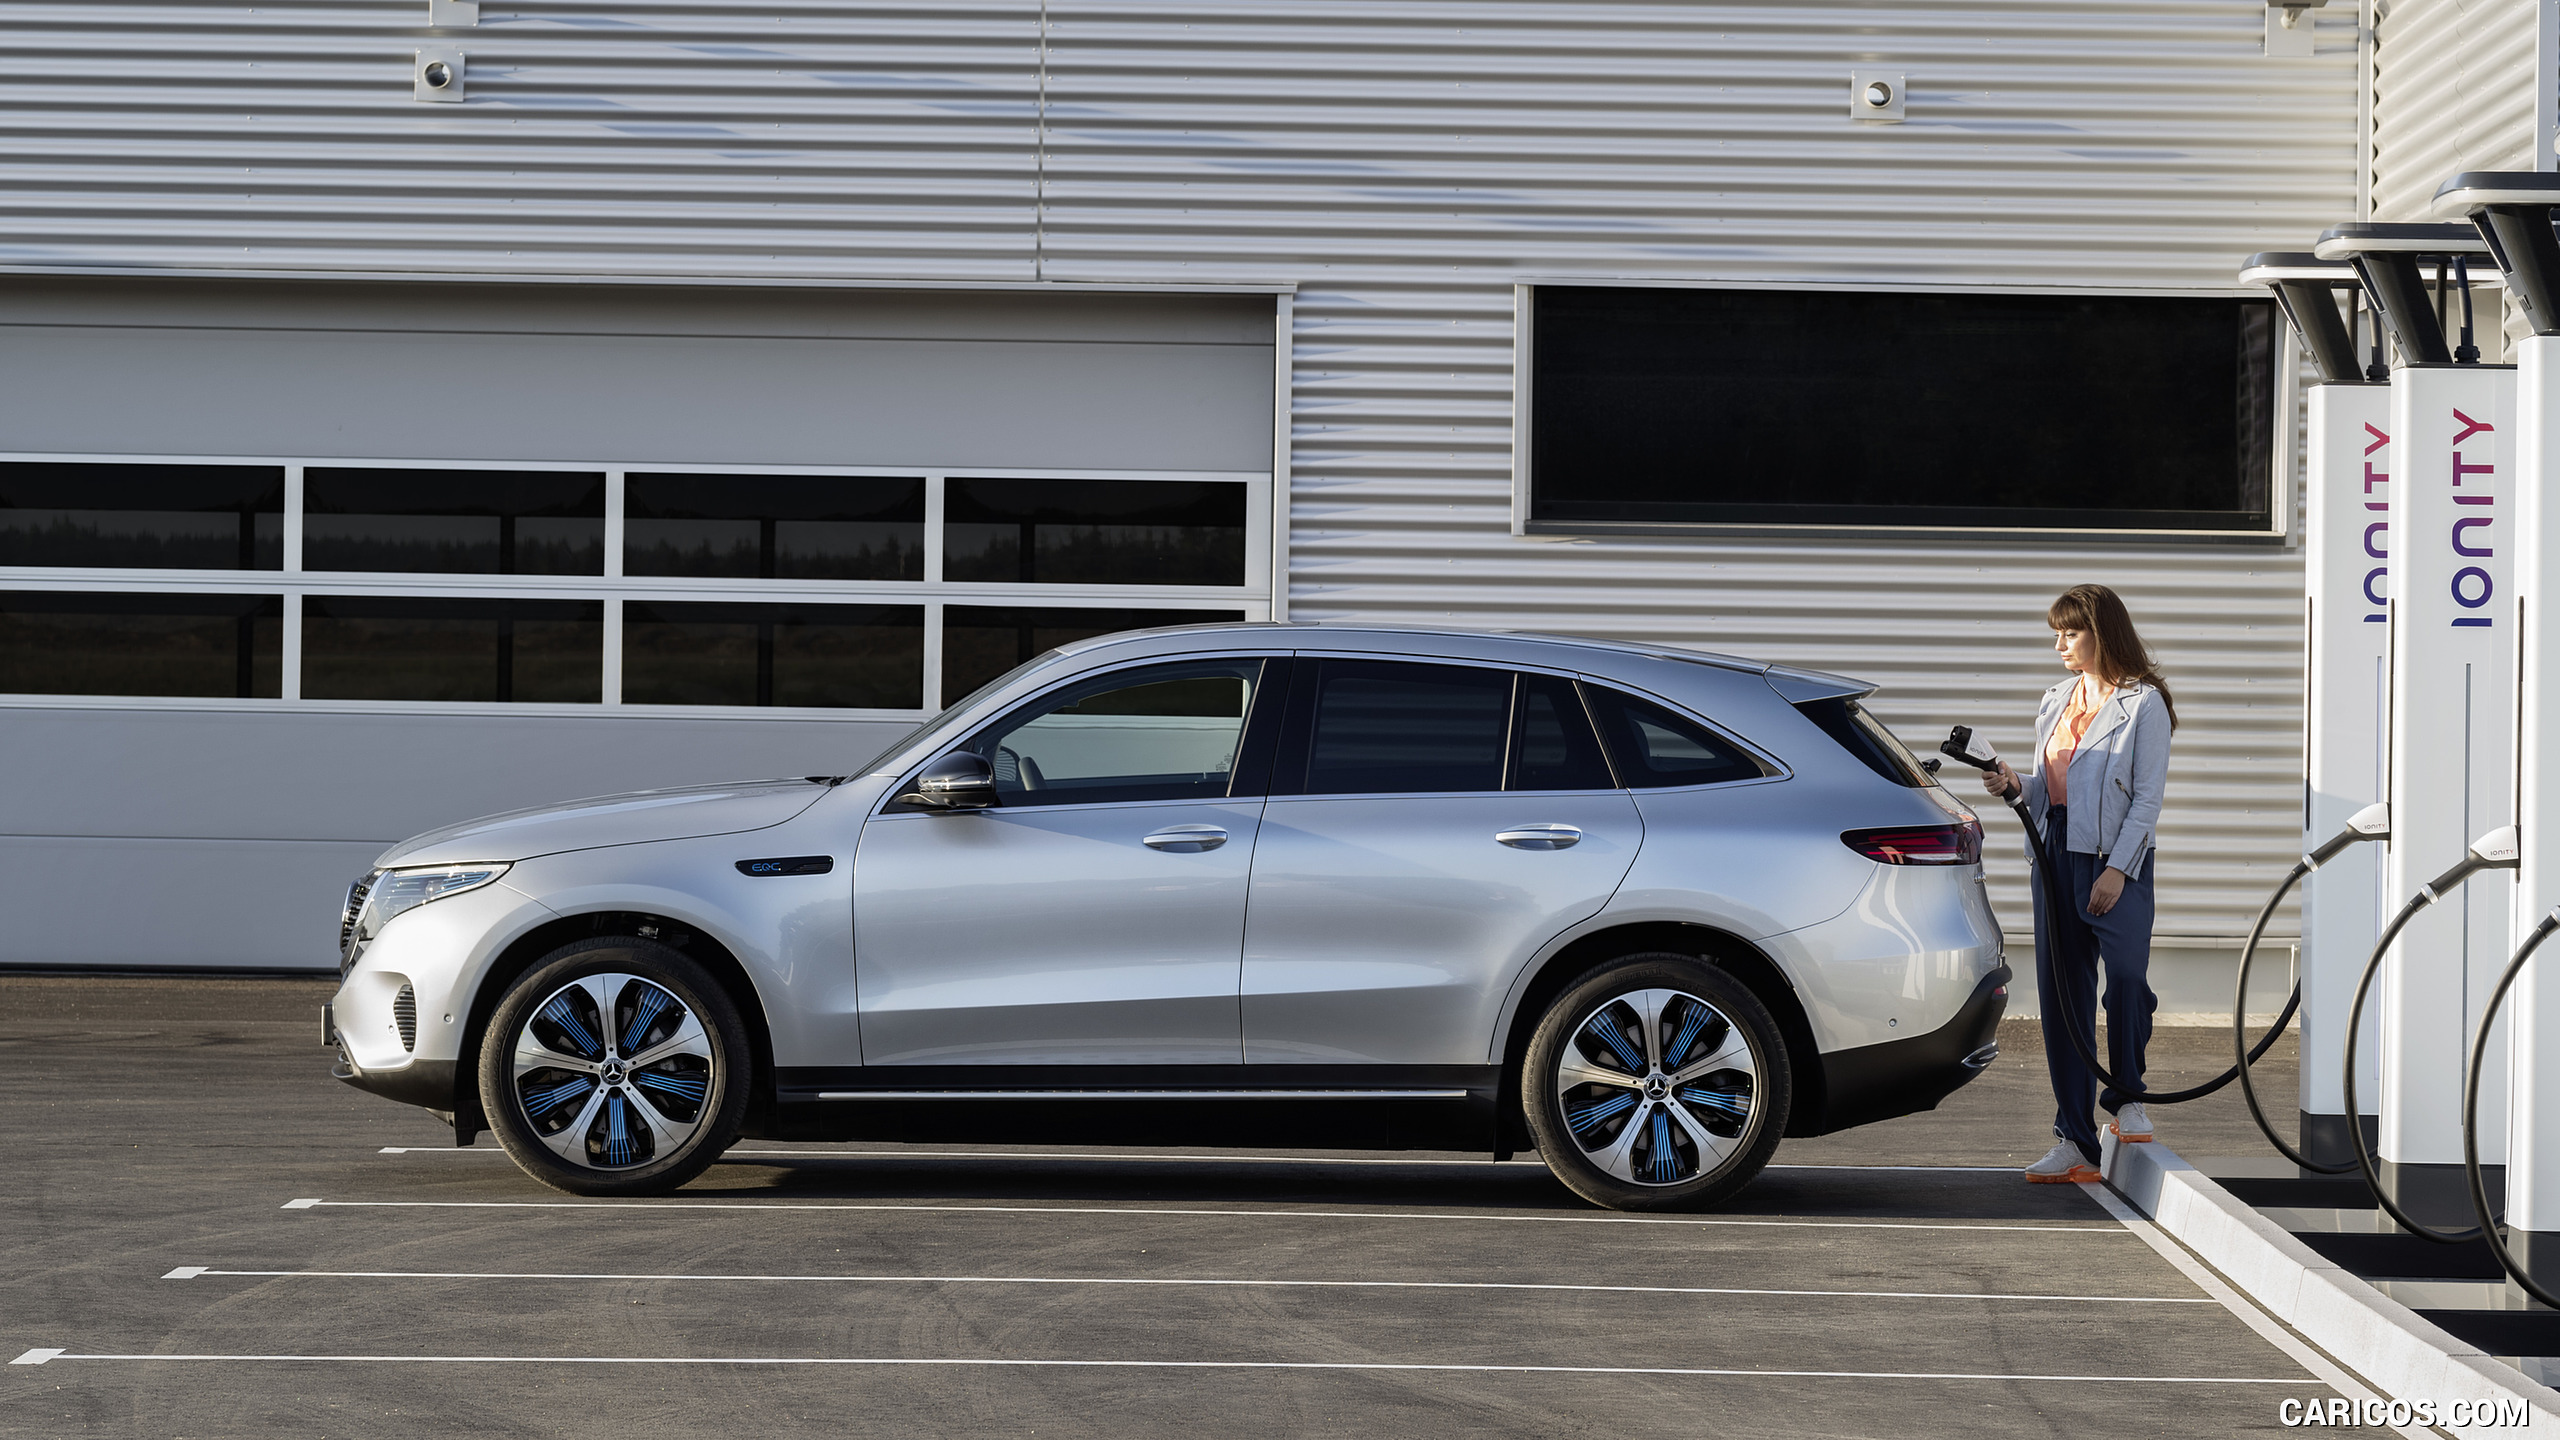 2020 Mercedes-Benz EQC 400 4MATIC Electric SUV - Side, #4 of 398